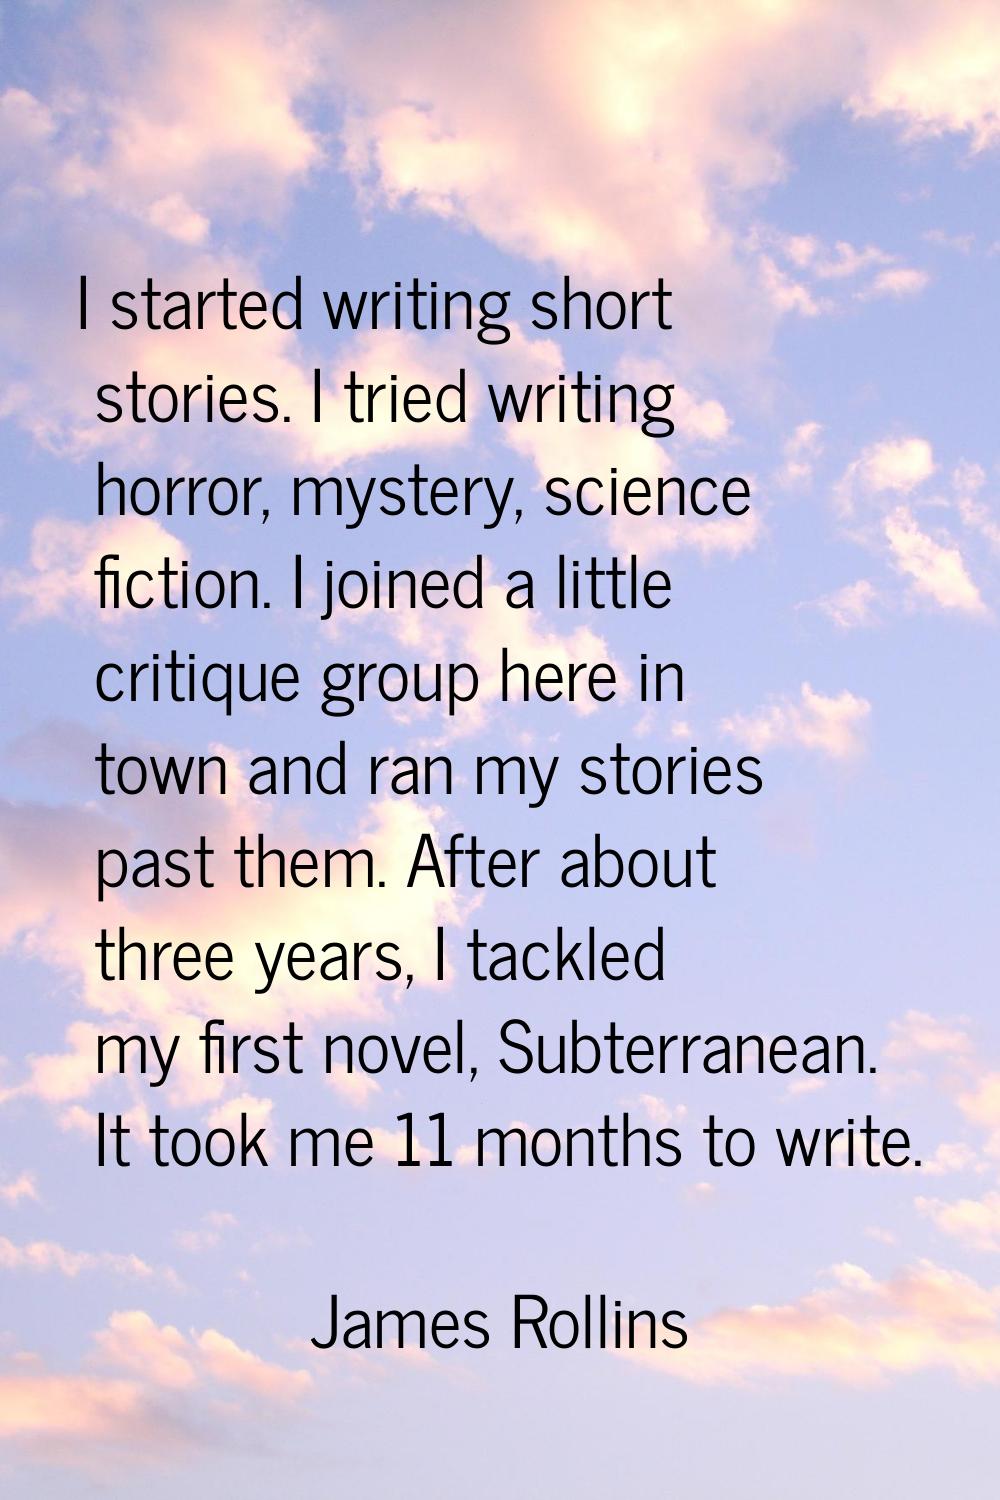 I started writing short stories. I tried writing horror, mystery, science fiction. I joined a littl